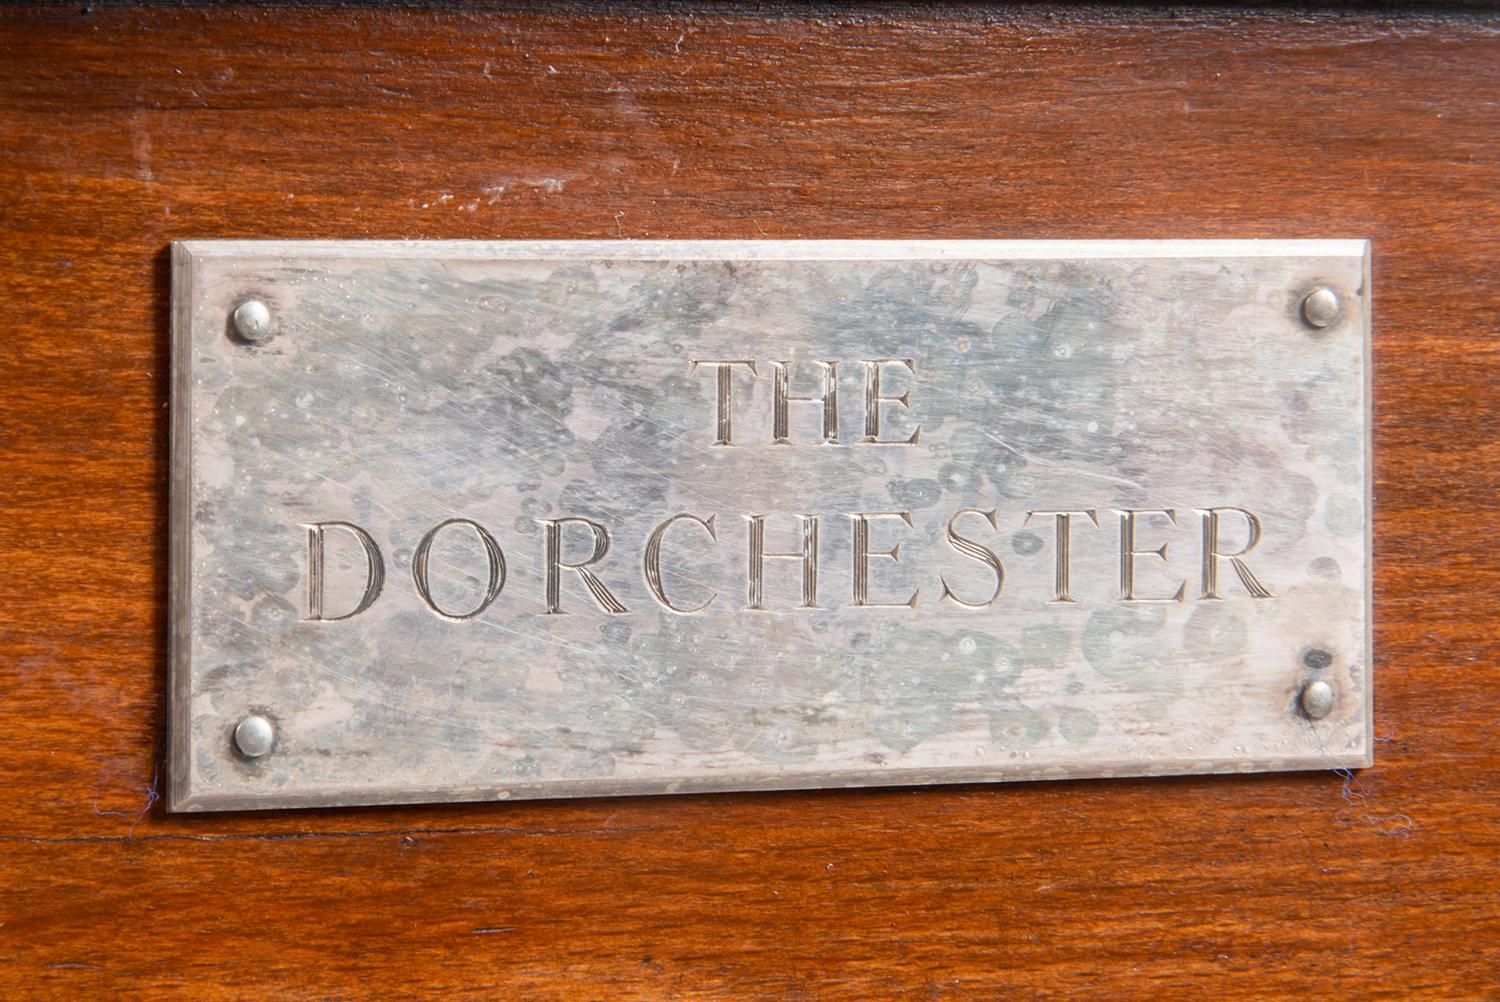 English Silver Plated, Mahogany Carving Trolley, from 'the Dorchester' Hotel